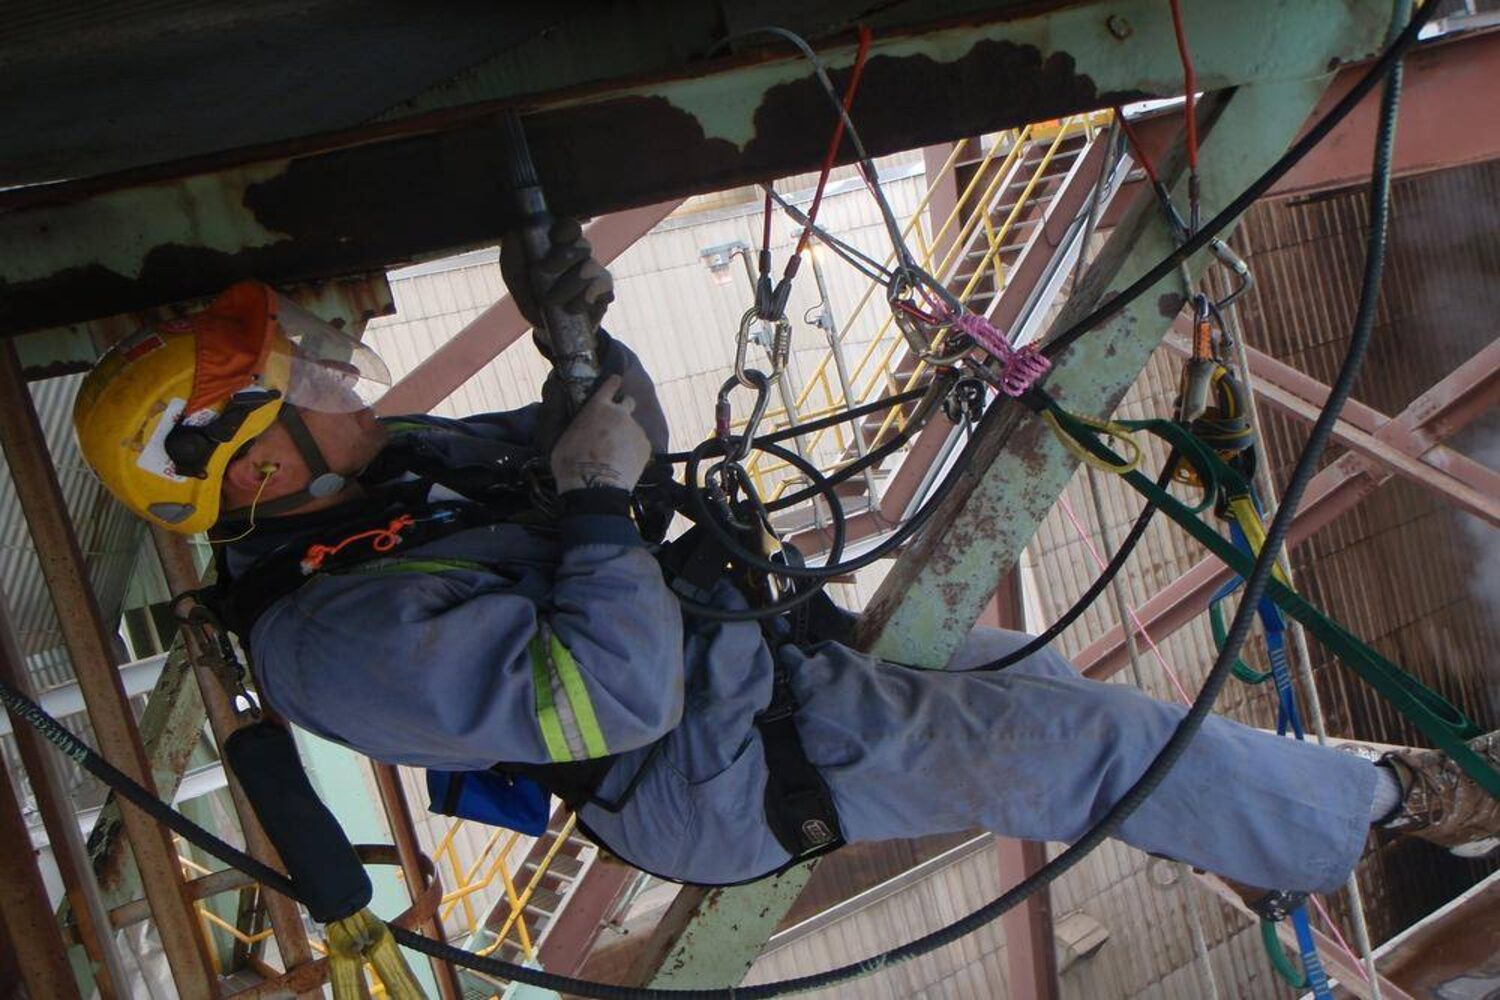 I want to be a rope access technician. What will my salary be